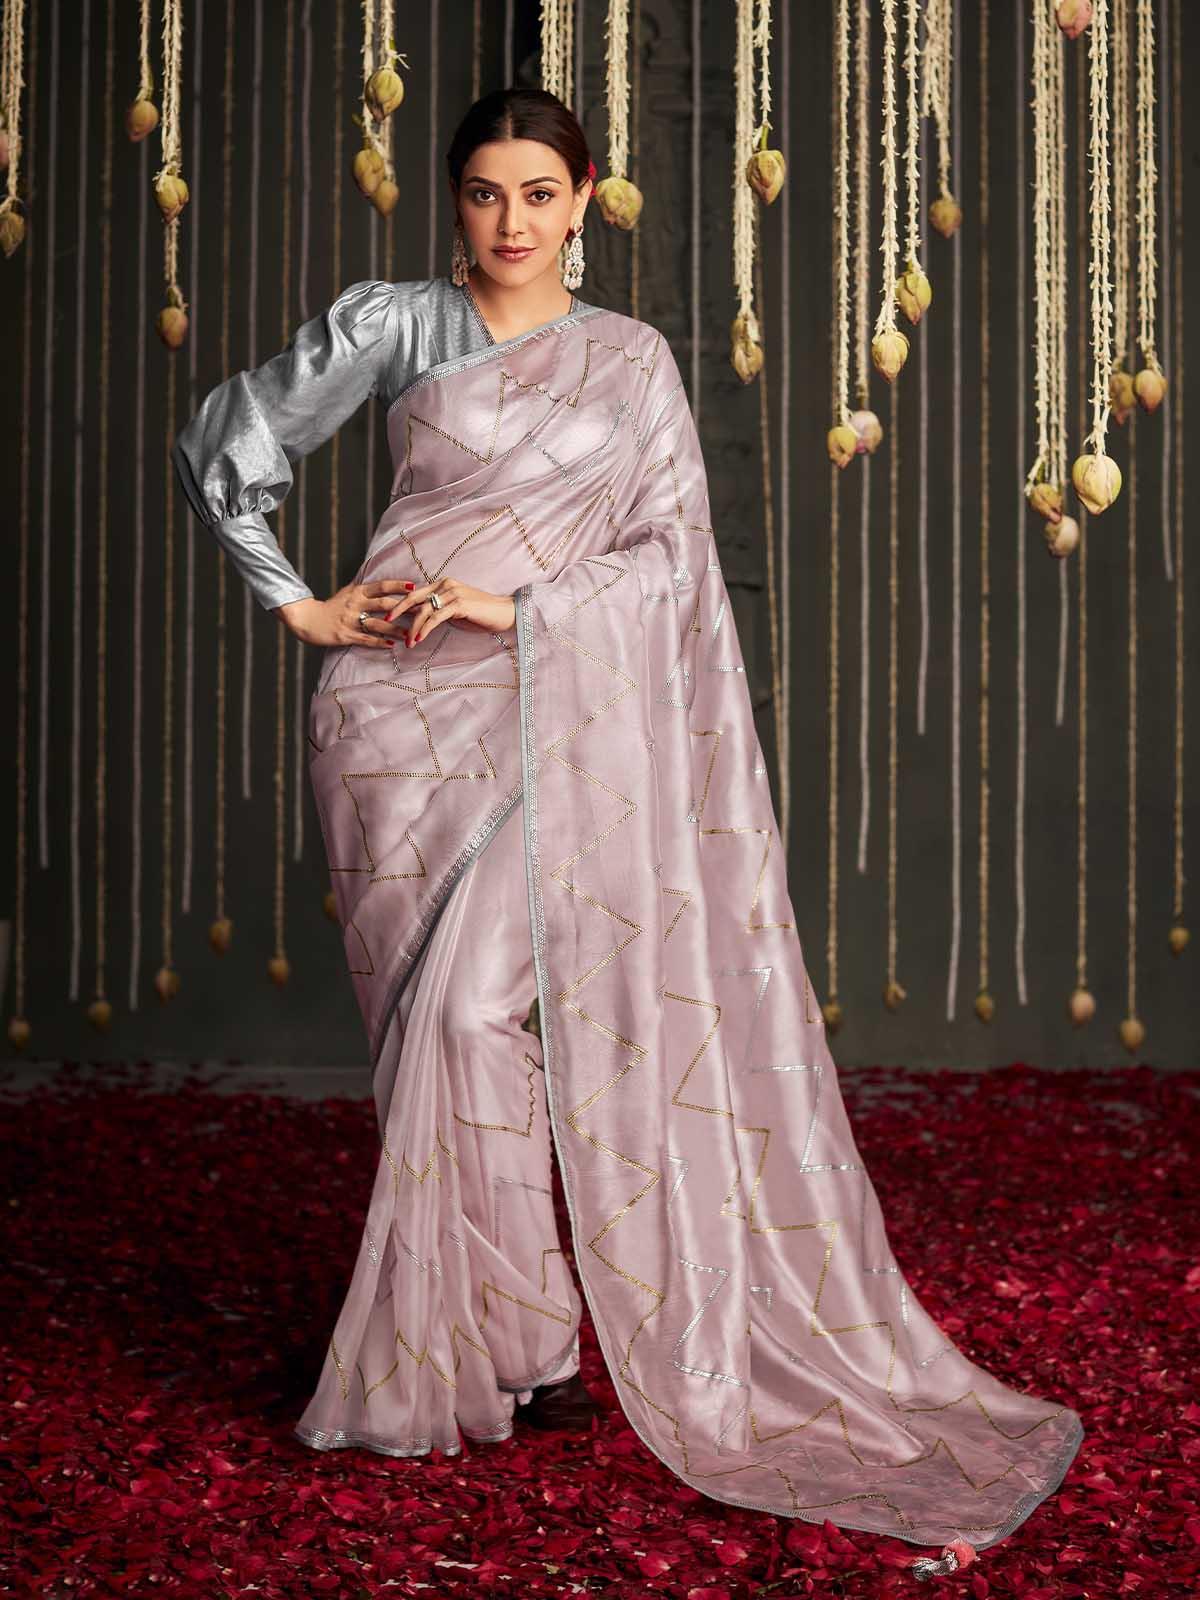 Women's Pink Silk Woven Design Saree With Blouse - Odette